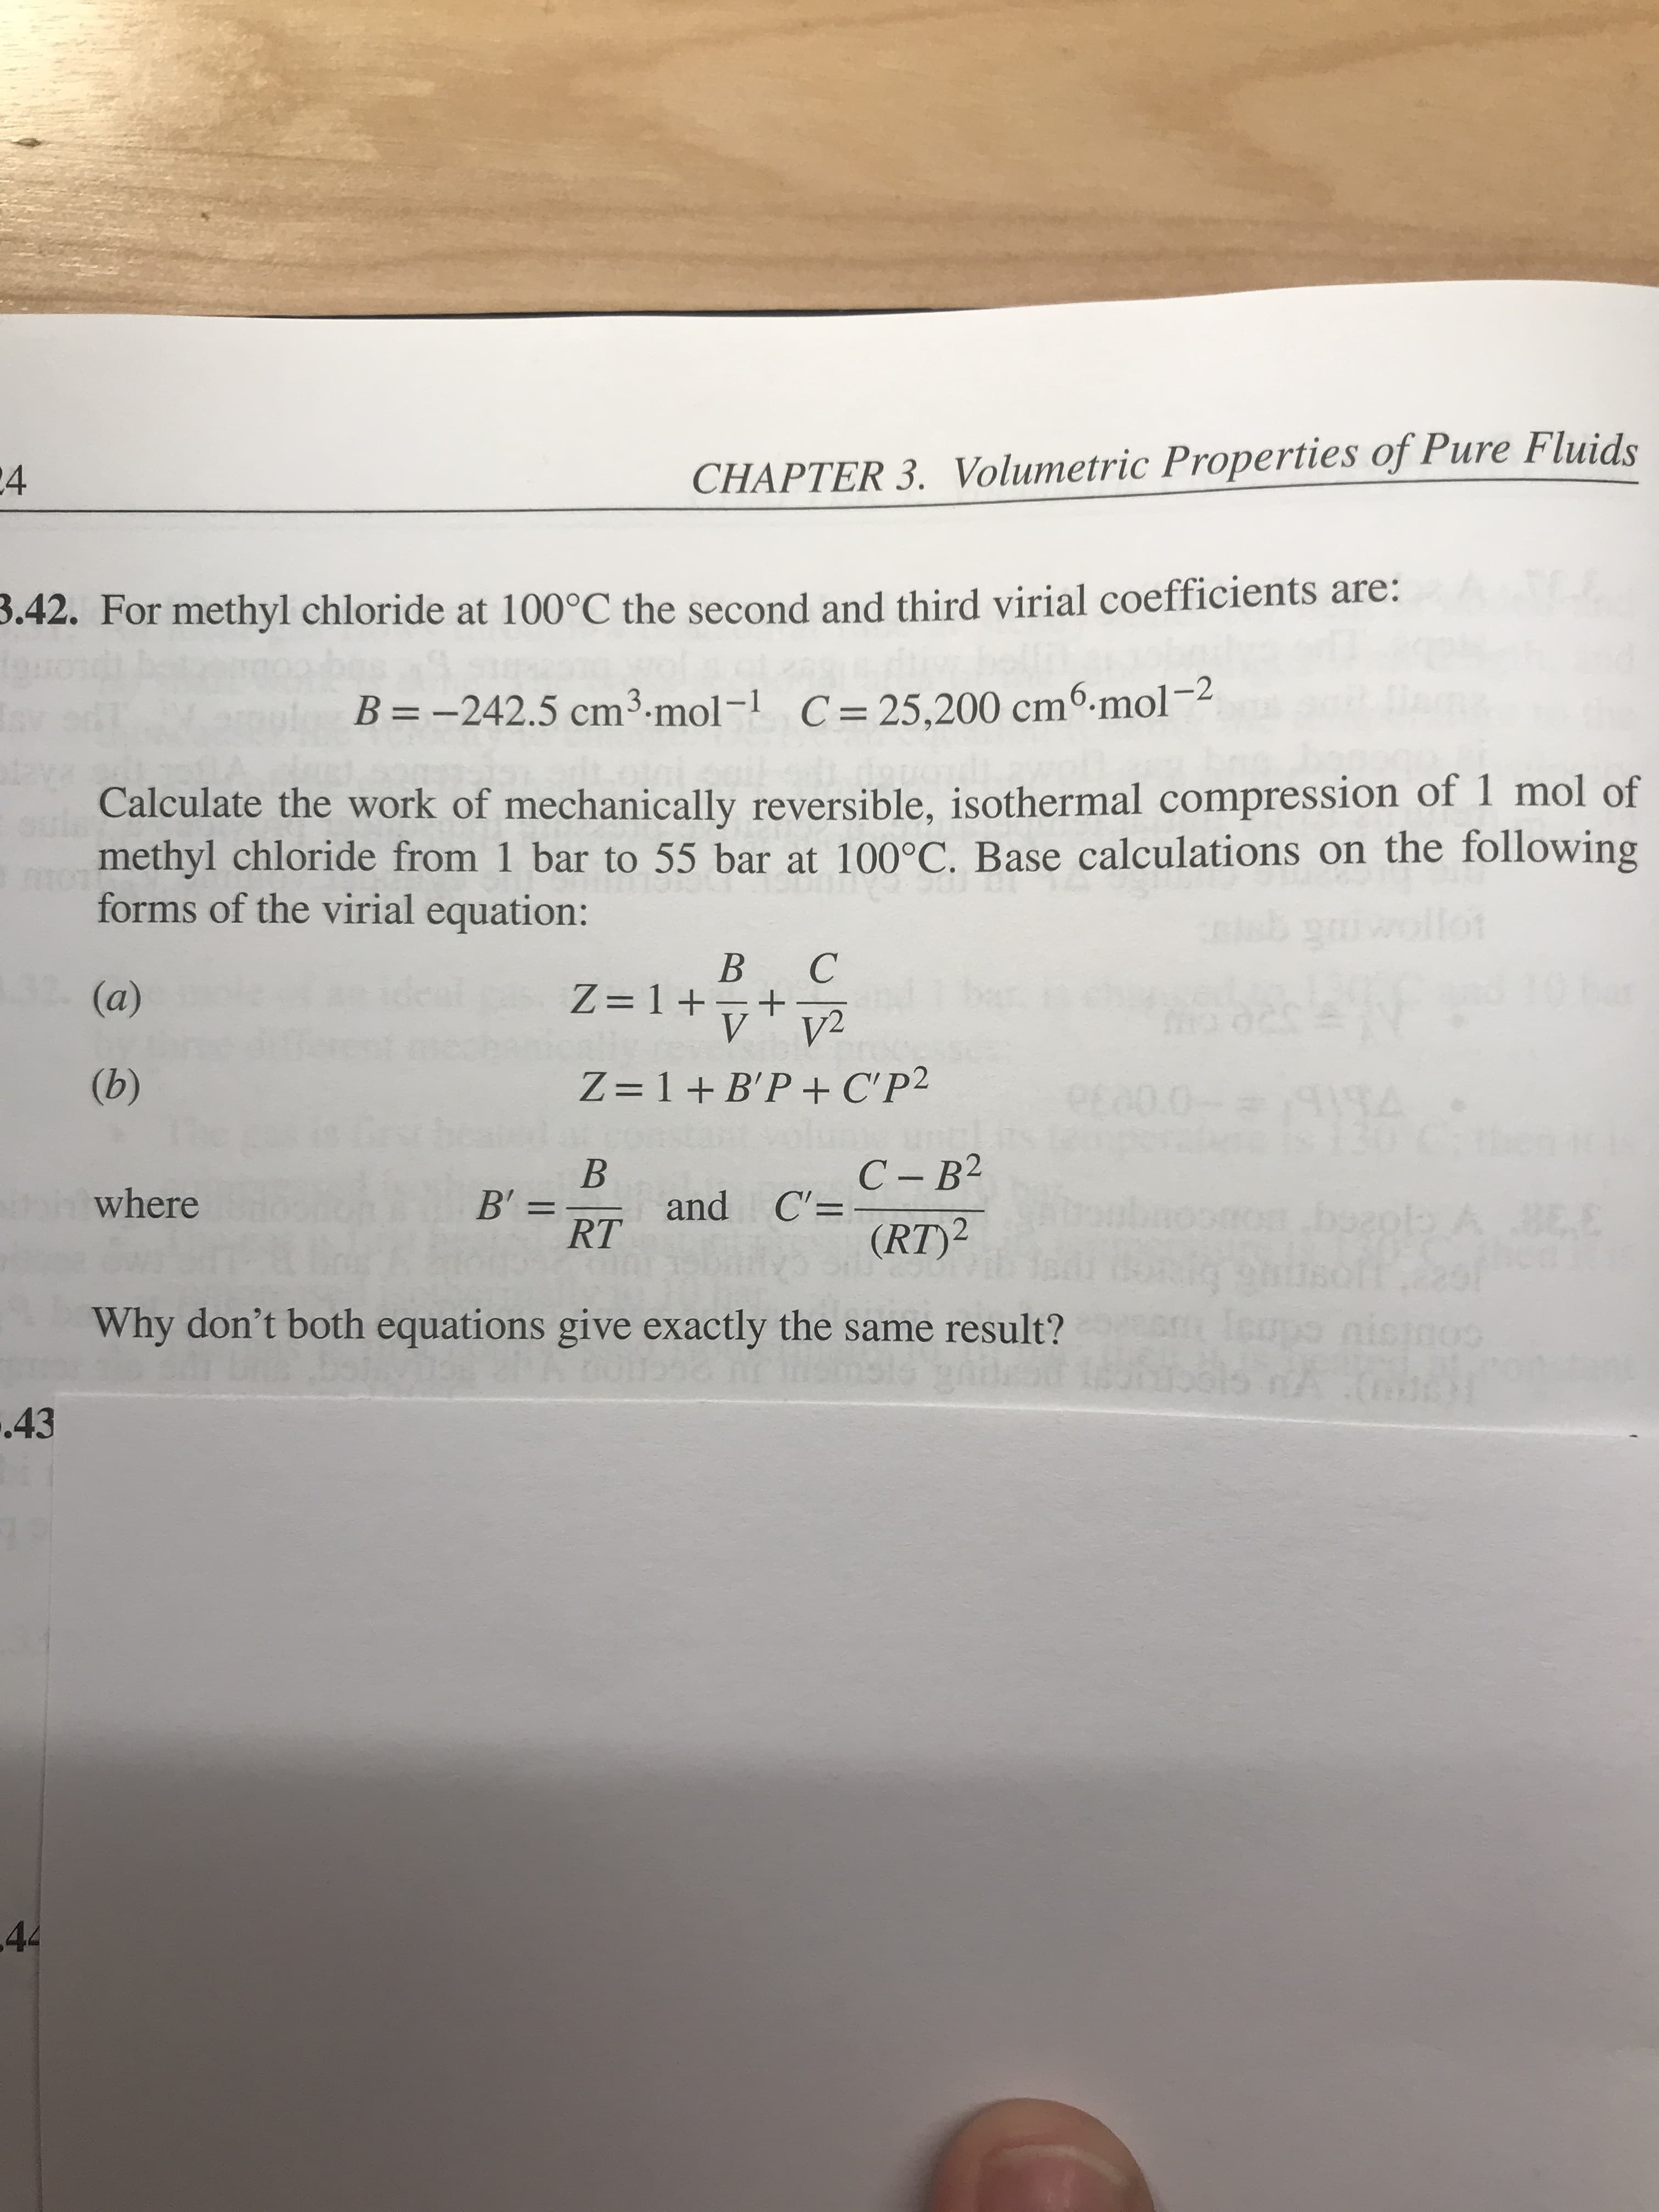 CHAPTER 3. Volumetric Properties of Pure Fluids
24
3.42. For methyl chloride at 100°C the second and third virial coefficients are:
B -242.5 cm3.mol -1 C= 25,200 cmo.mol-
Calculate the work of mechanically reversible, isothermal compression of 1 mol of
methyl chloride from 1 bar to 55 bar at 100°C. Base calculations on the following
forms of the virial equation:
tot
В С
+
V
32(a)
ताी
deal
z=1+tv
V2
(b)
Z 1 B'P + C'P2
E0.0-
Grst
130
С -В2
В
and C'=
В'"
where
ro boap A BEE
11
(RT)2
RT
faups nisinos
Why don't both equations give exactly the same result?
HOS & BRIGE
als A
C
1
43
44
